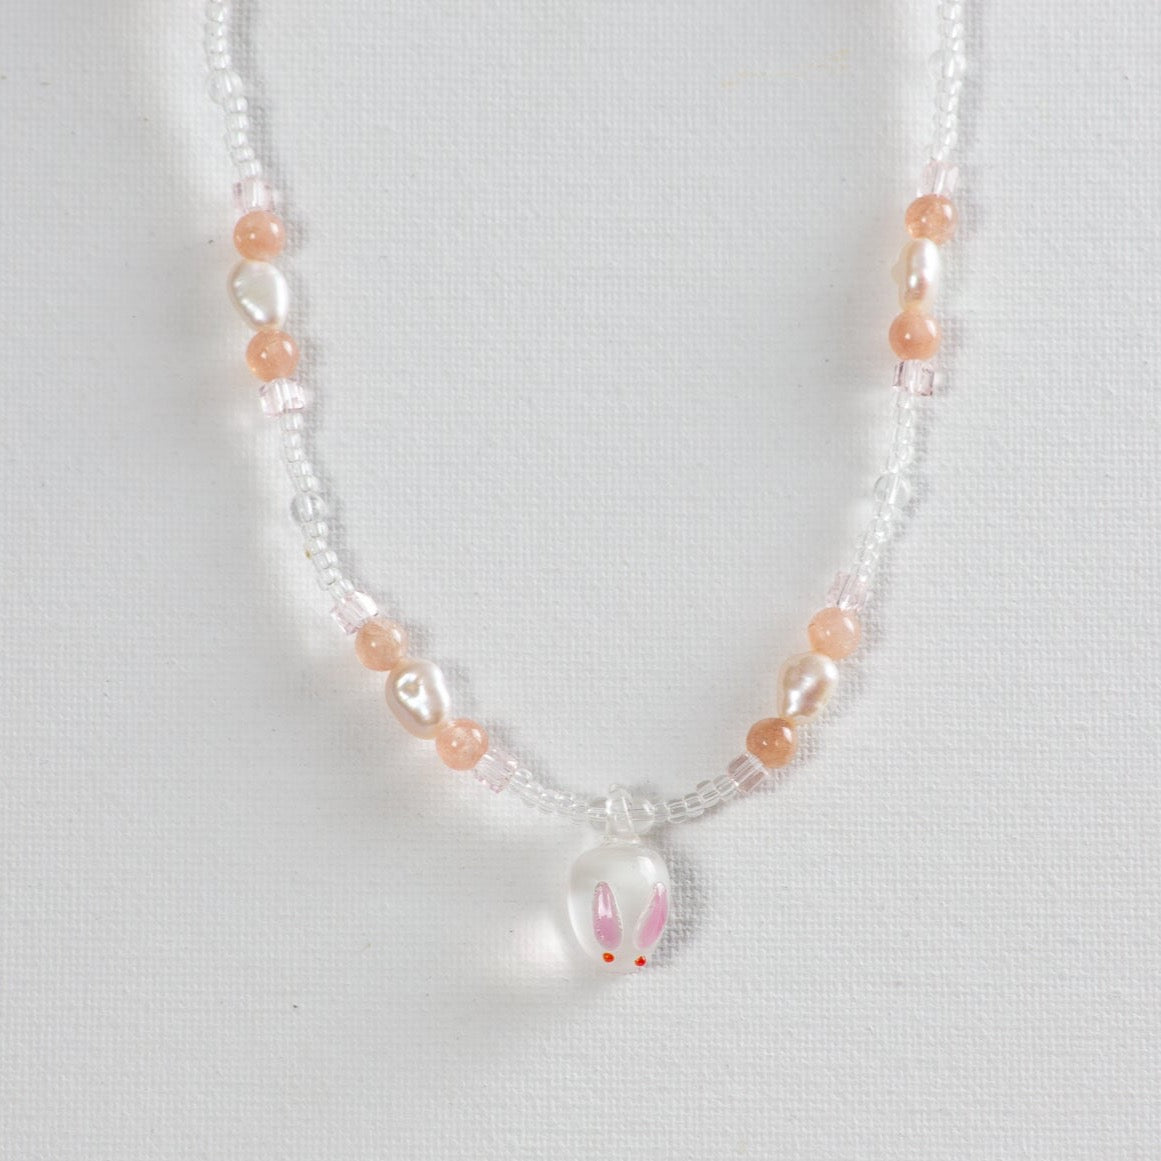 Beaded bunny necklace with clear glass beads forming the main portion, accented by pink glass beads and pearl beads every 2 inches. A charming bunny pendant made of glass hangs at the center. The necklace is placed on a white background.